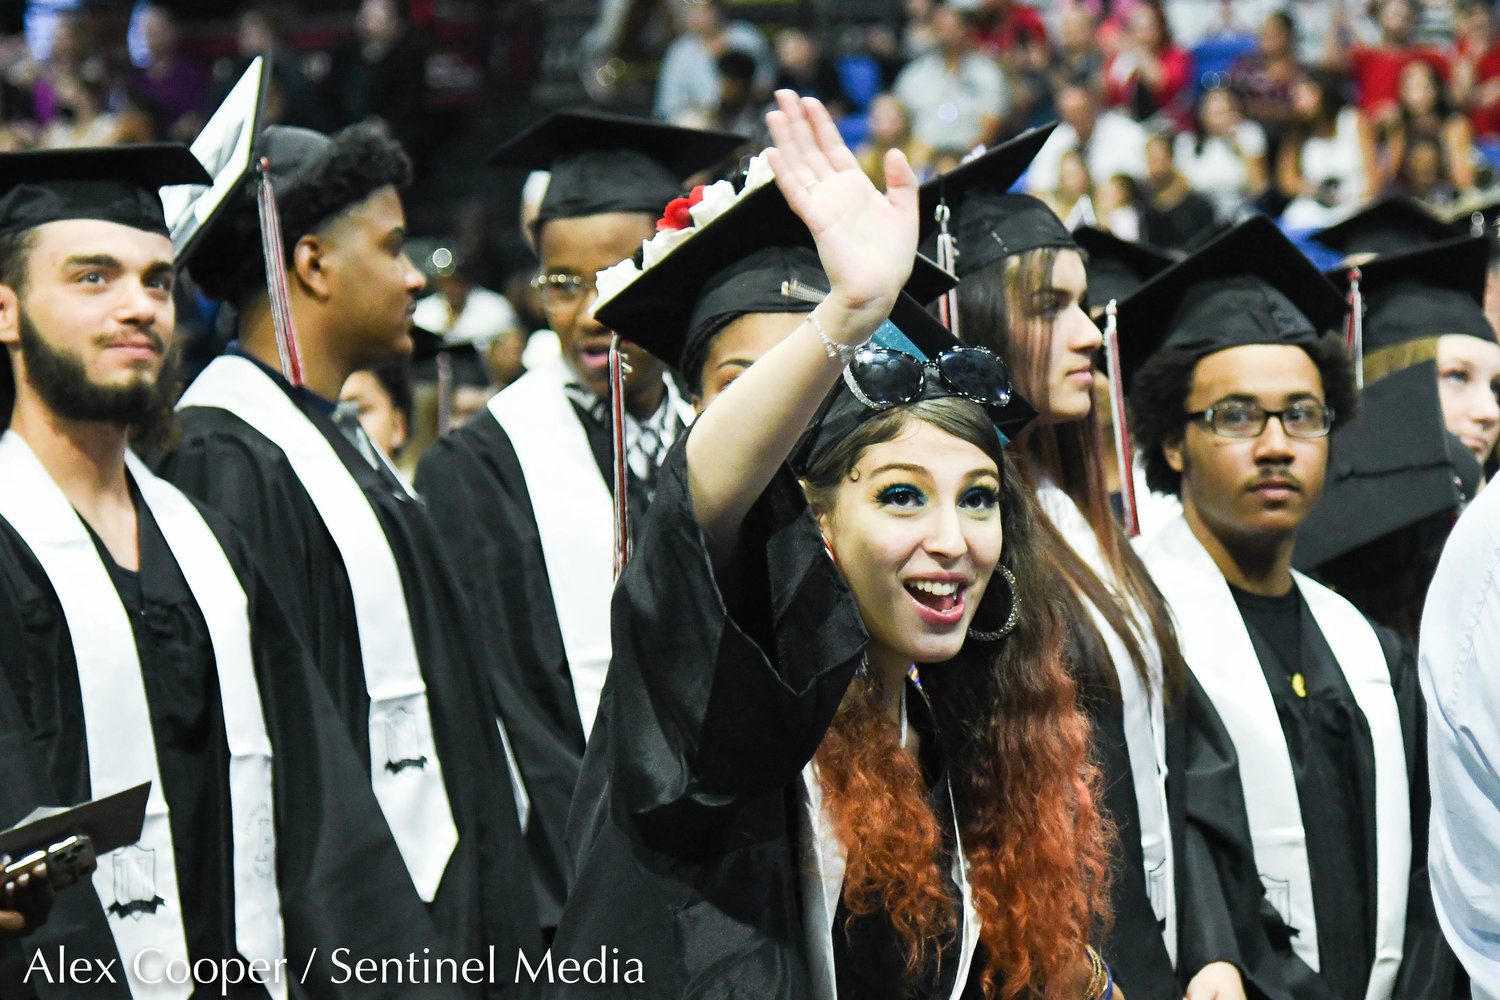 Graduate Yanalise Correa Dejesus waves to the crowd during the annual commencement ceremony for Thomas R. Proctor High School on Friday at the Adirondack Bank Center at the Utica Memorial Auditorium.